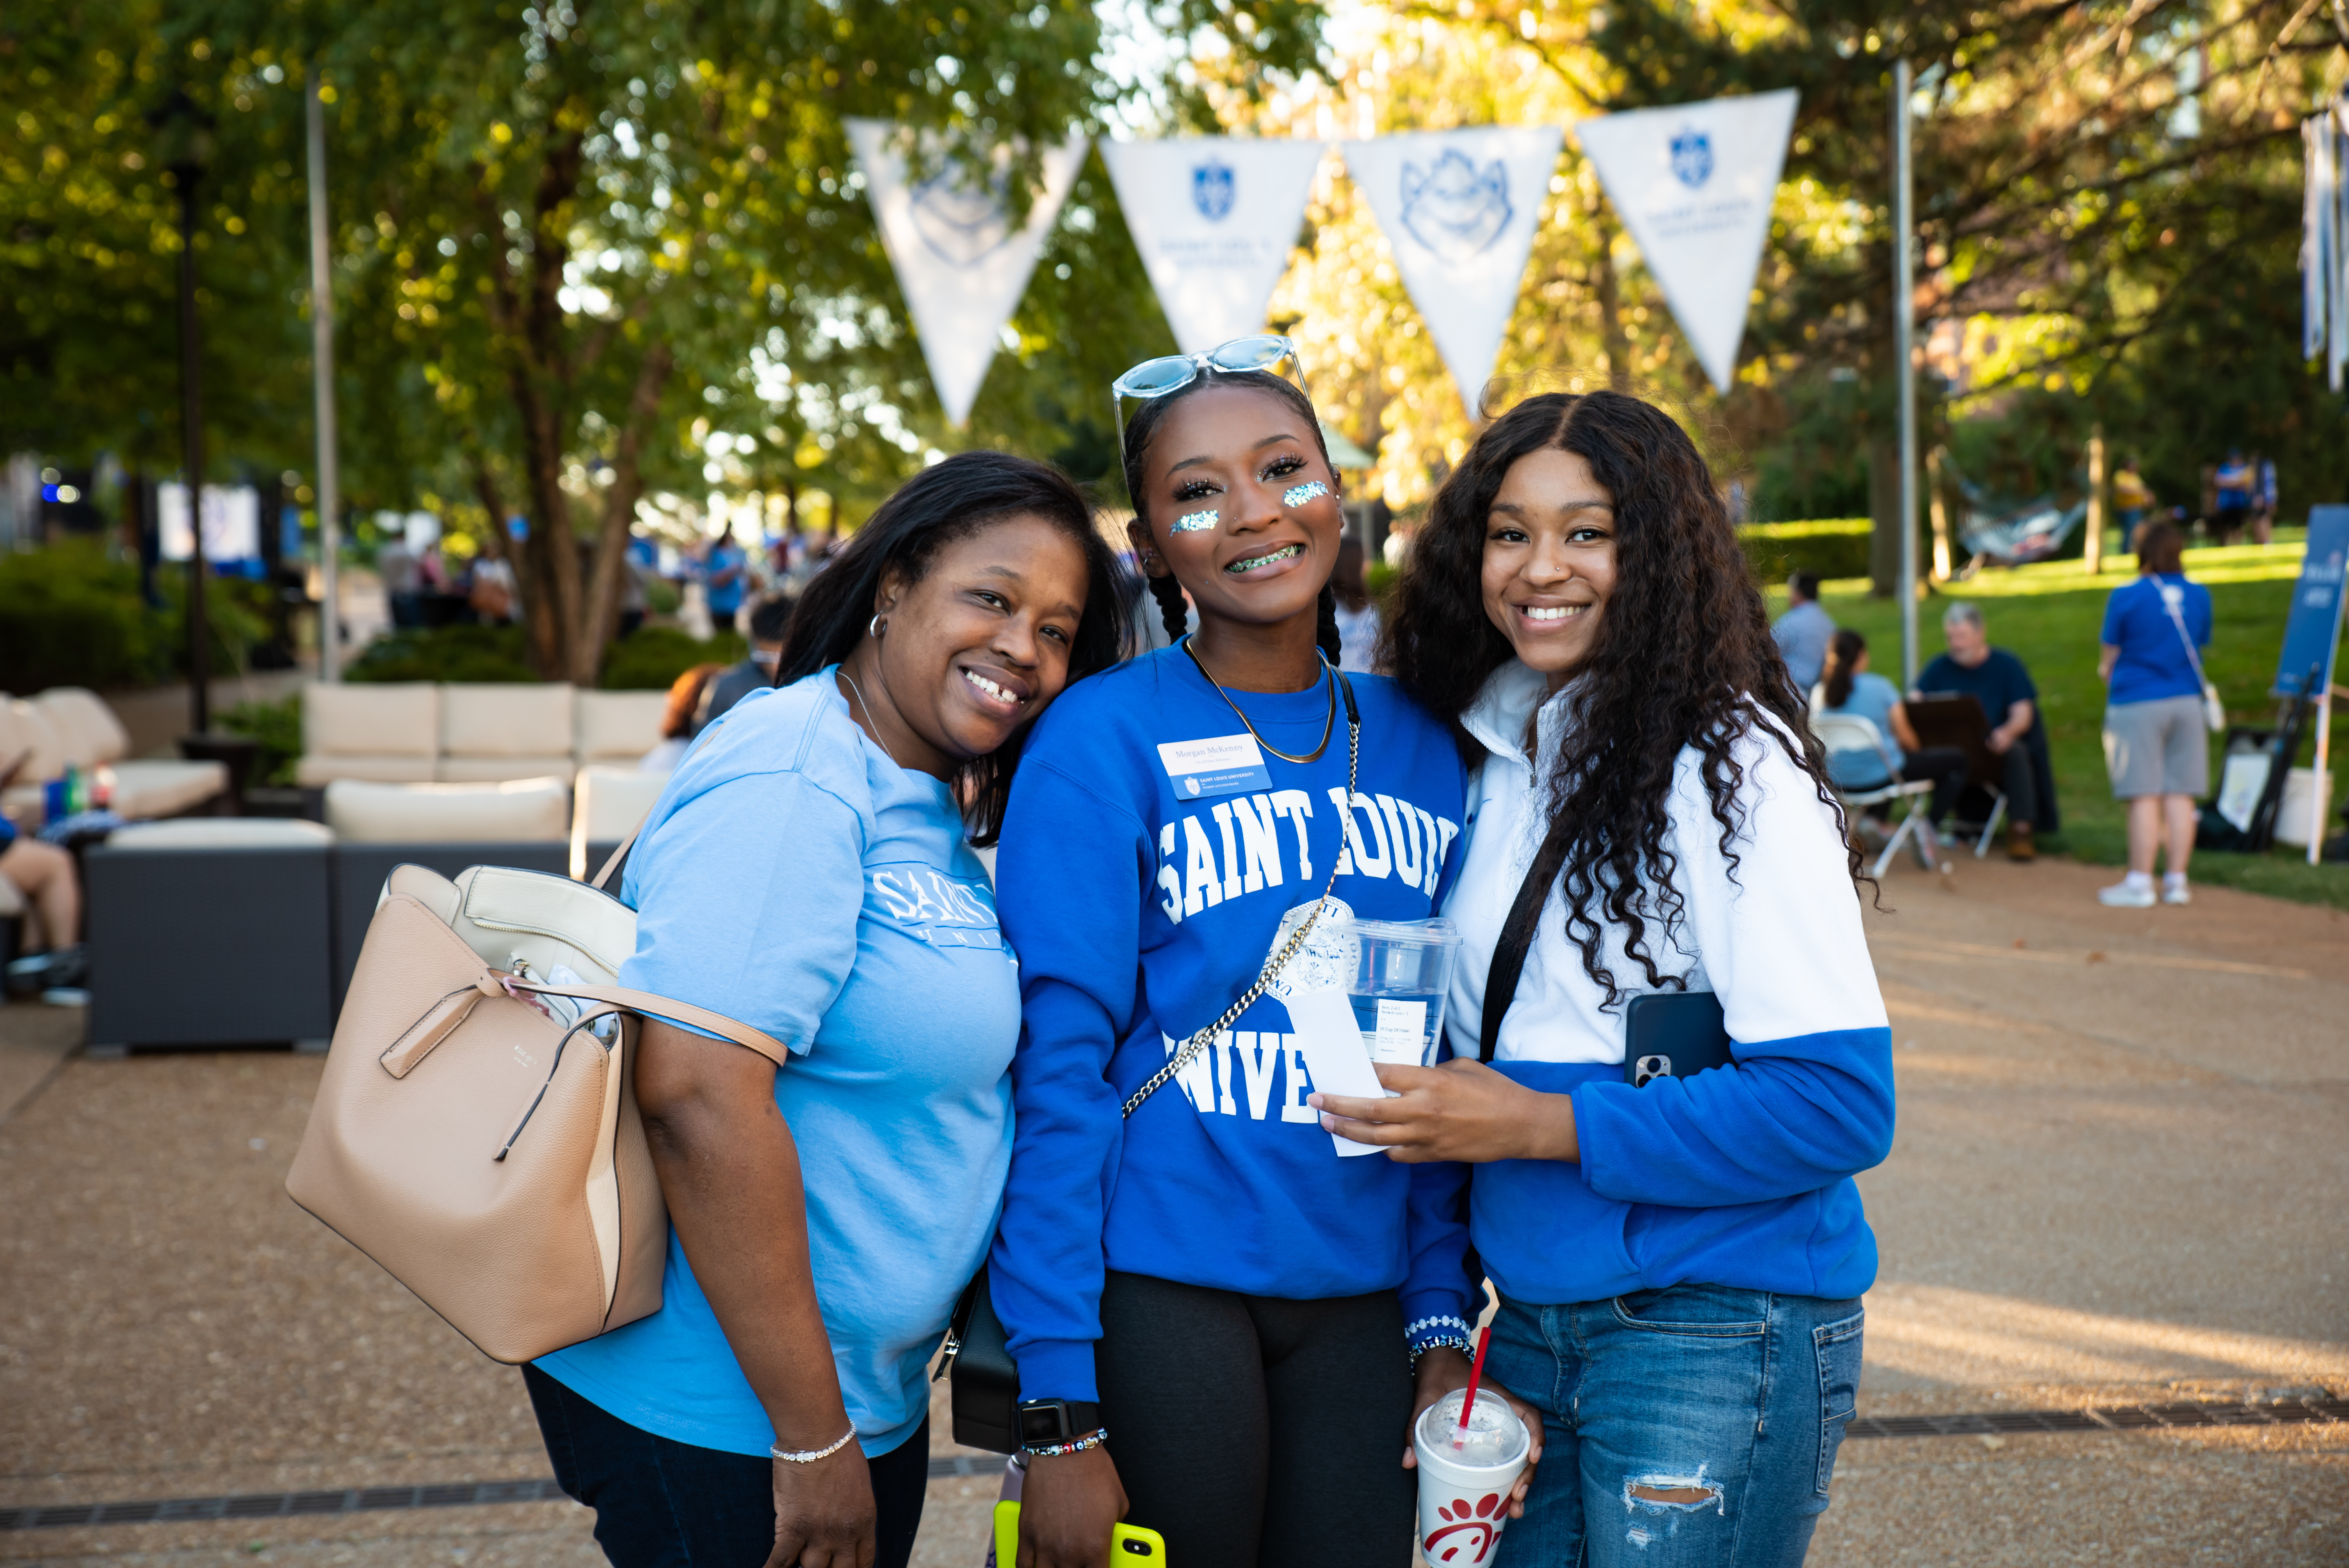 Three women wearing SLU shirts smile while standing under a homecoming banner.